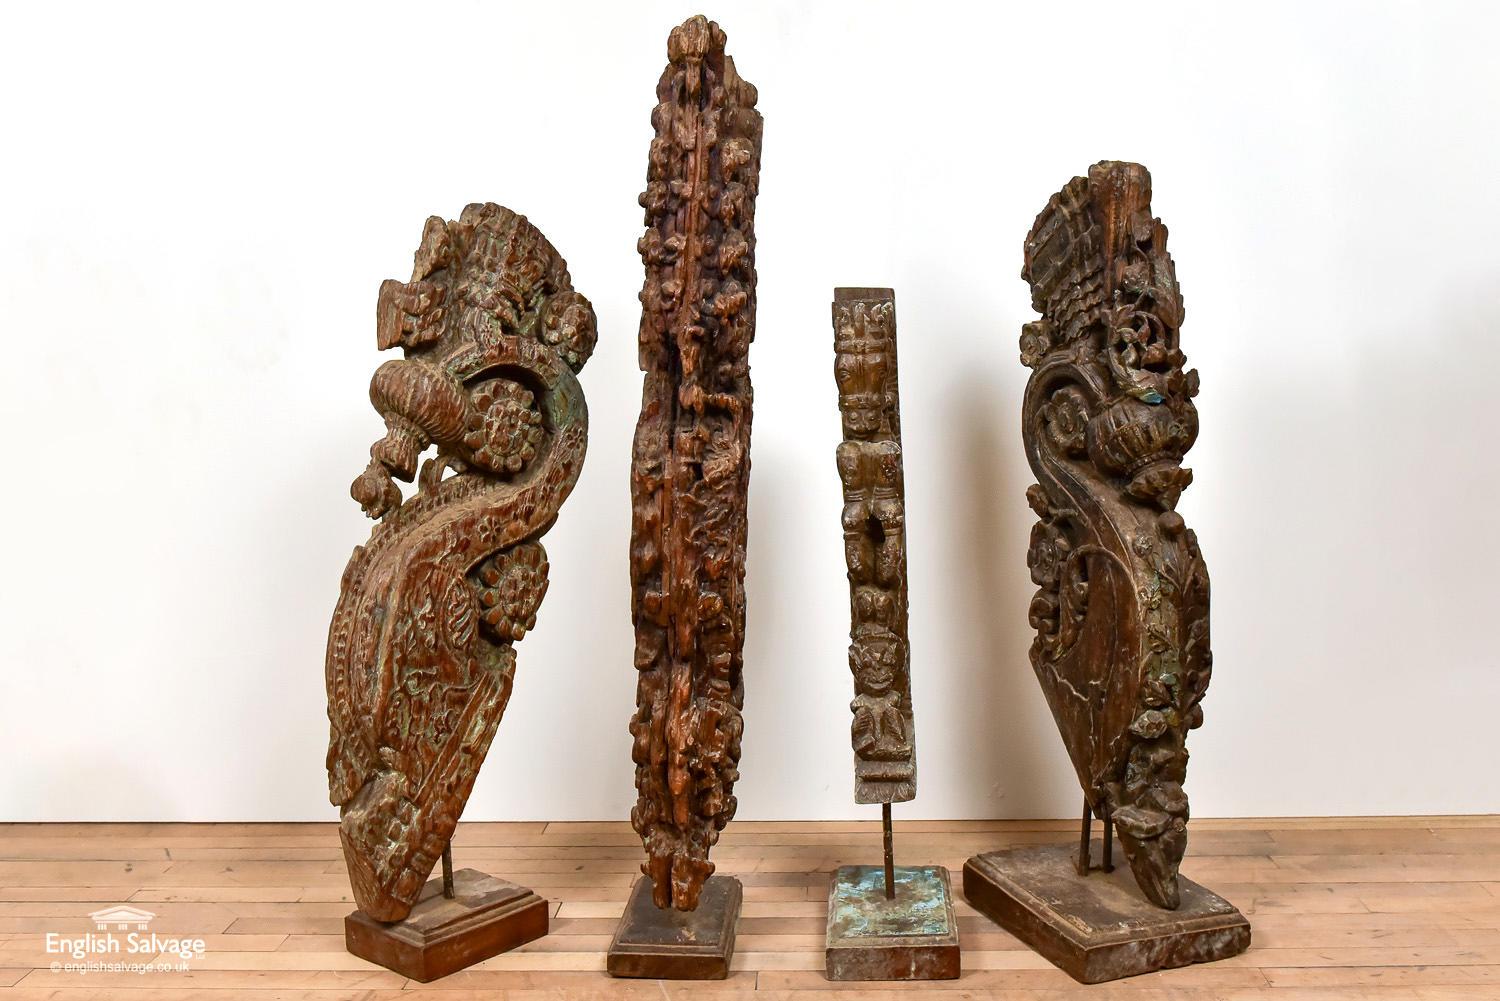 Old teak corbels / brackets mounted as decorative sculptures. Measures: Heights vary from 85cm, 199cm, 100cm, 116cm.